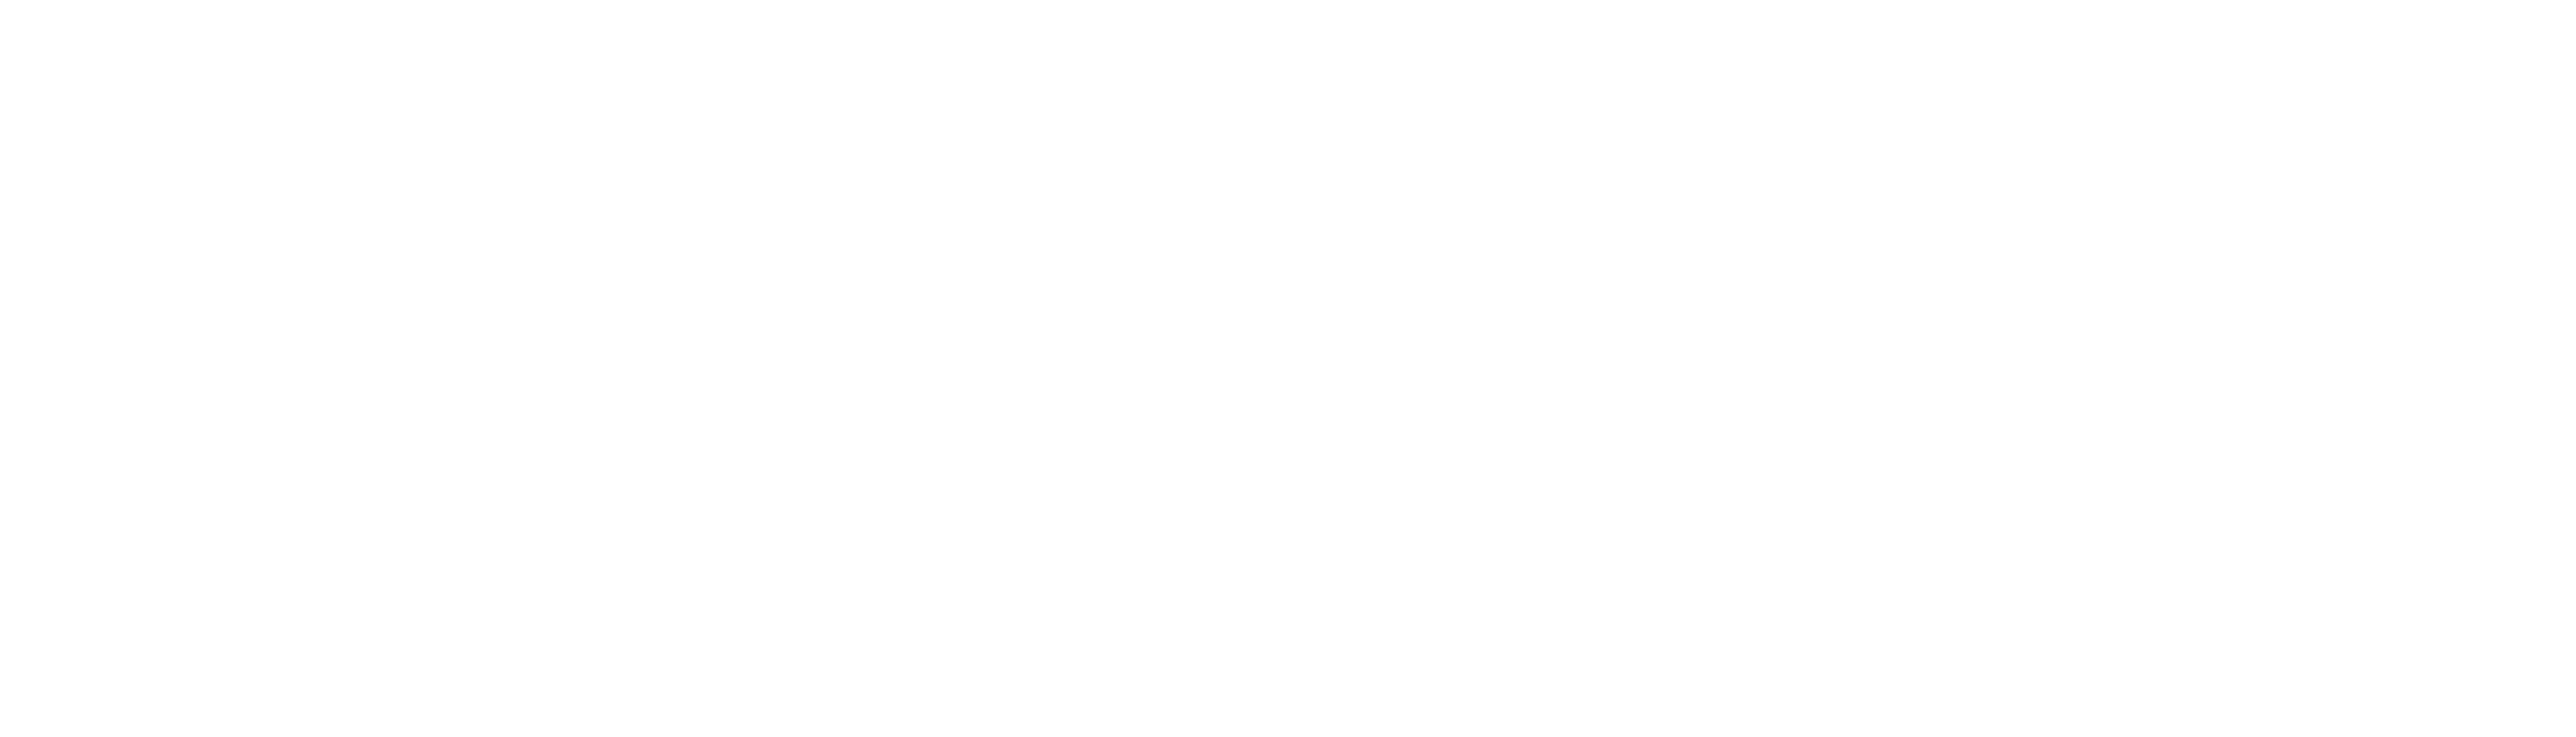 Drug and Alcohol Recovery Service HMP Exeter logo